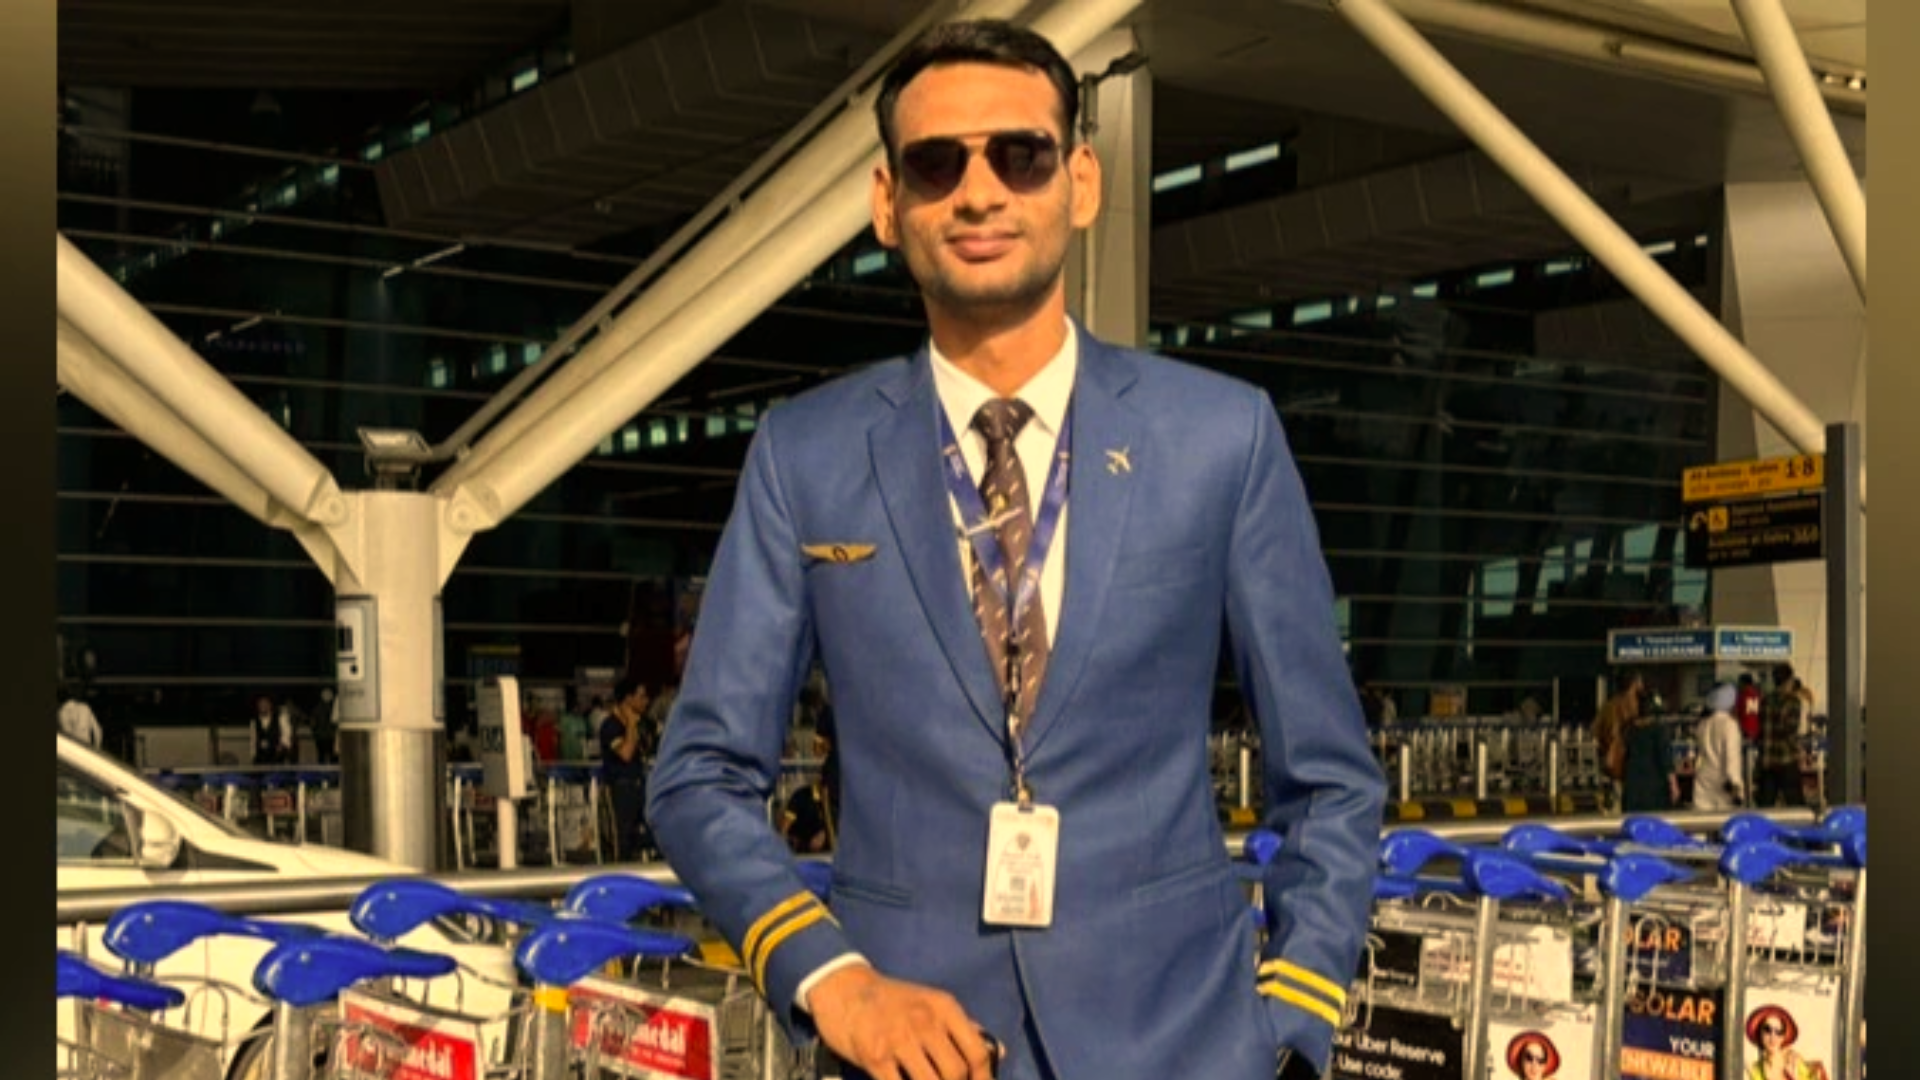 Impersonator From UP Arrested For Posing As Singapore Airlines Pilot At Delhi Airport